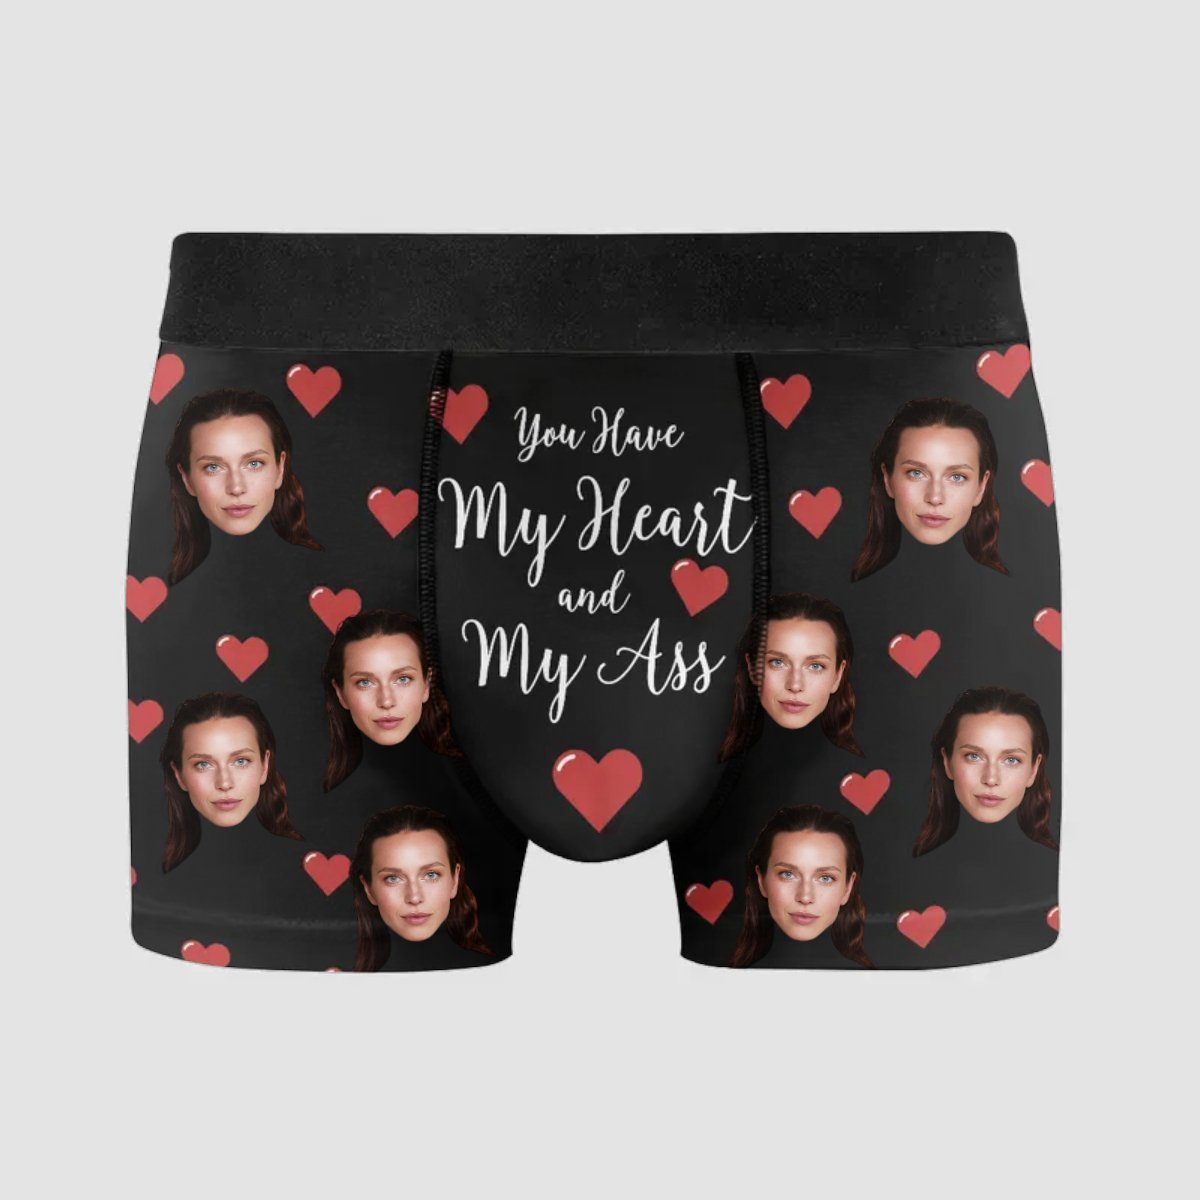 Couple - You Have My Heart And My Ass - Personalized Men's Boxer Briefs - The Next Custom Gift